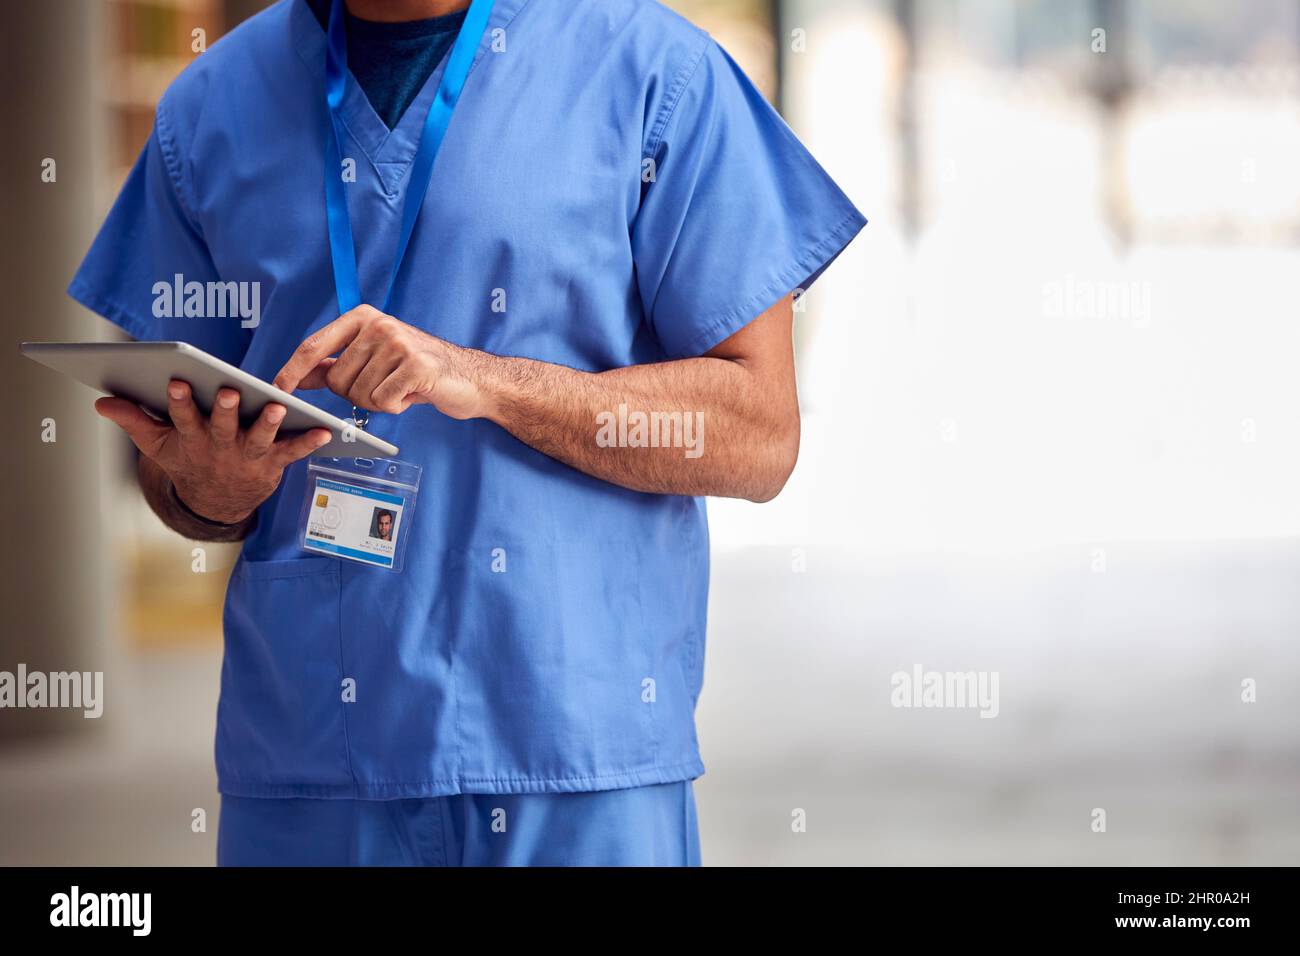 Close Up Of Male Medical Worker In Scrubs With Digital Tablet In Hospital Stock Photo